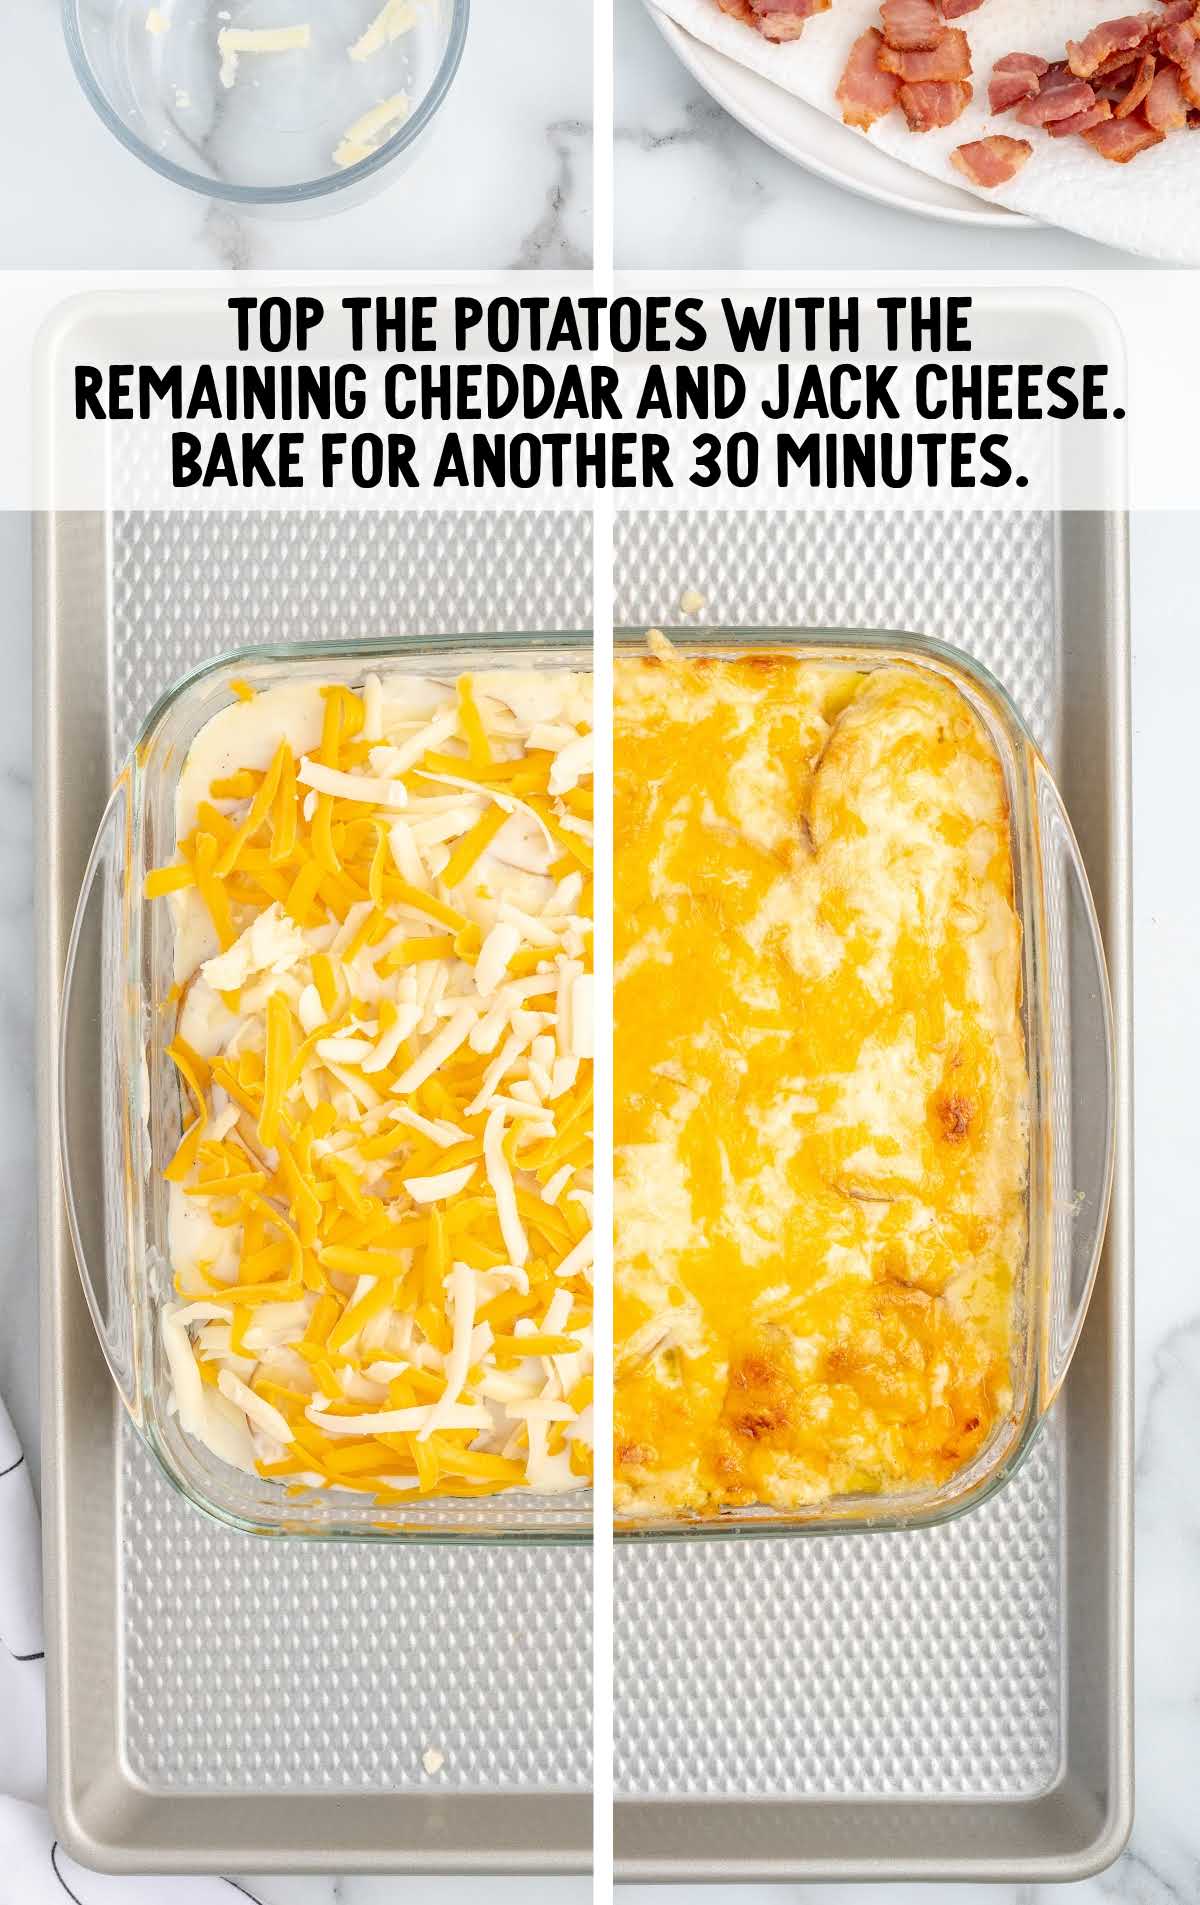 cheddar and jack cheese topped on top of the potatoes and bake